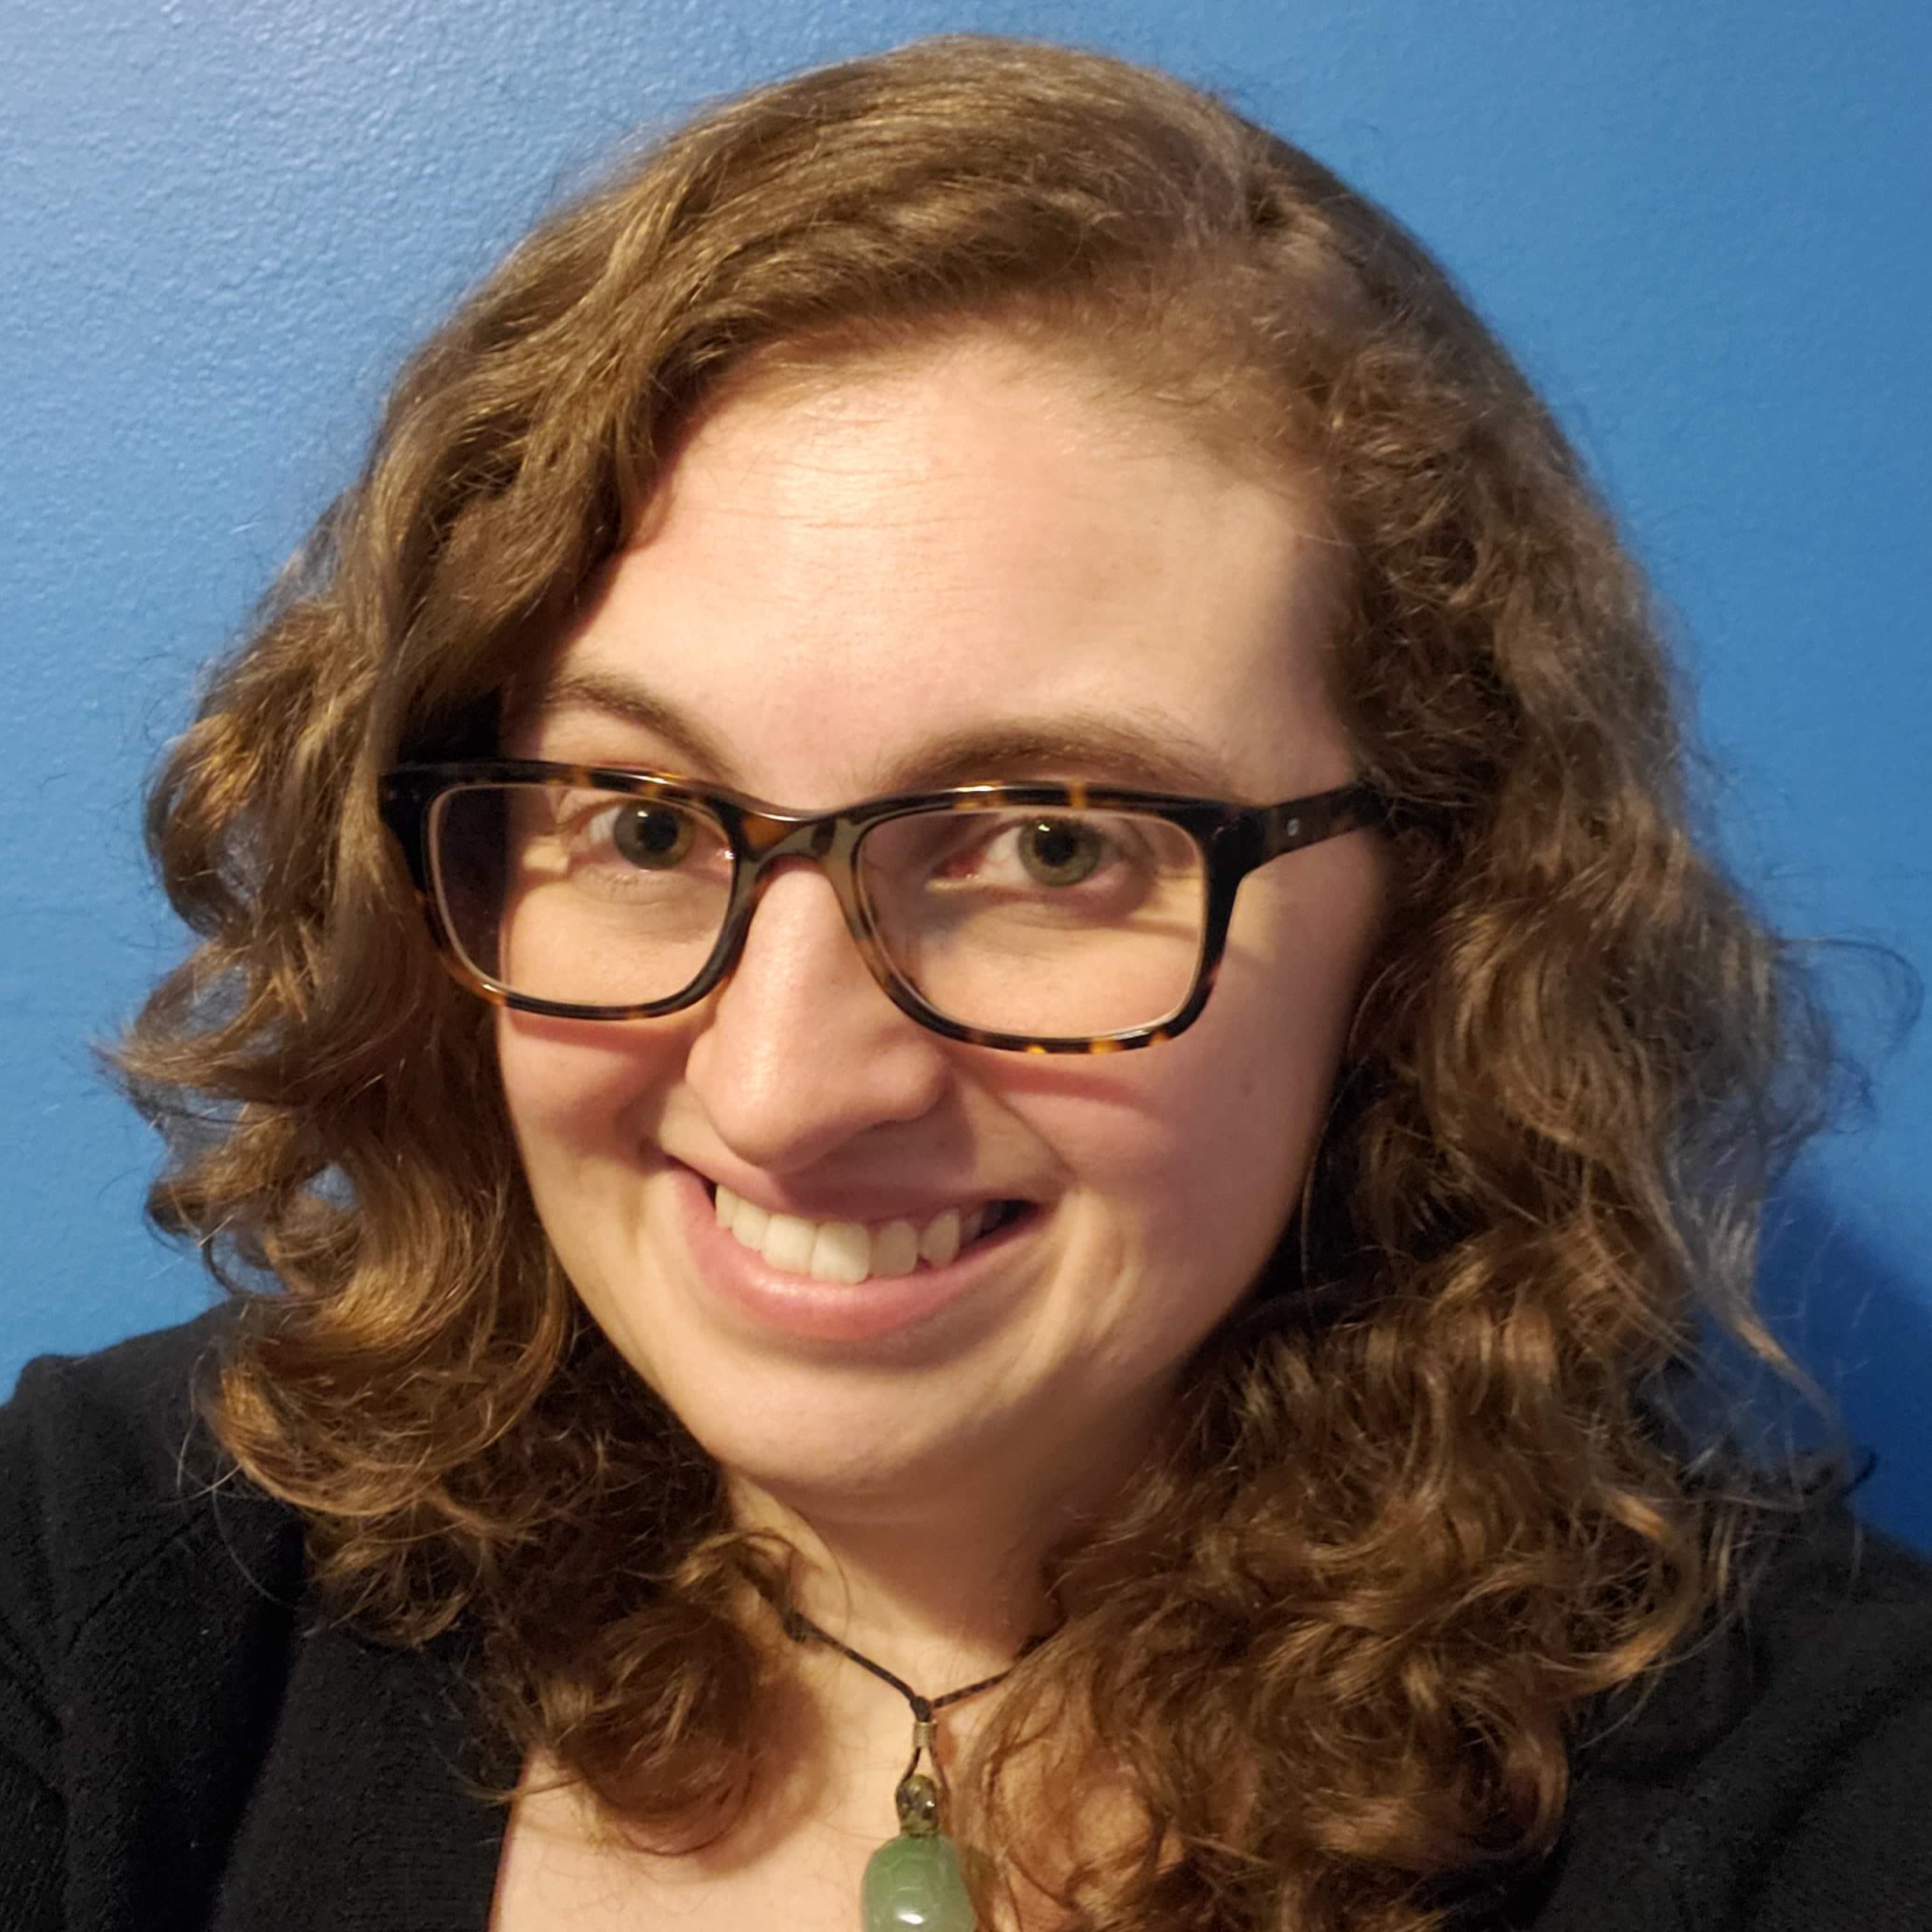 Jen Bauer's headshot picture, which shows a curly-haired brunette with glasses and a winning smile.